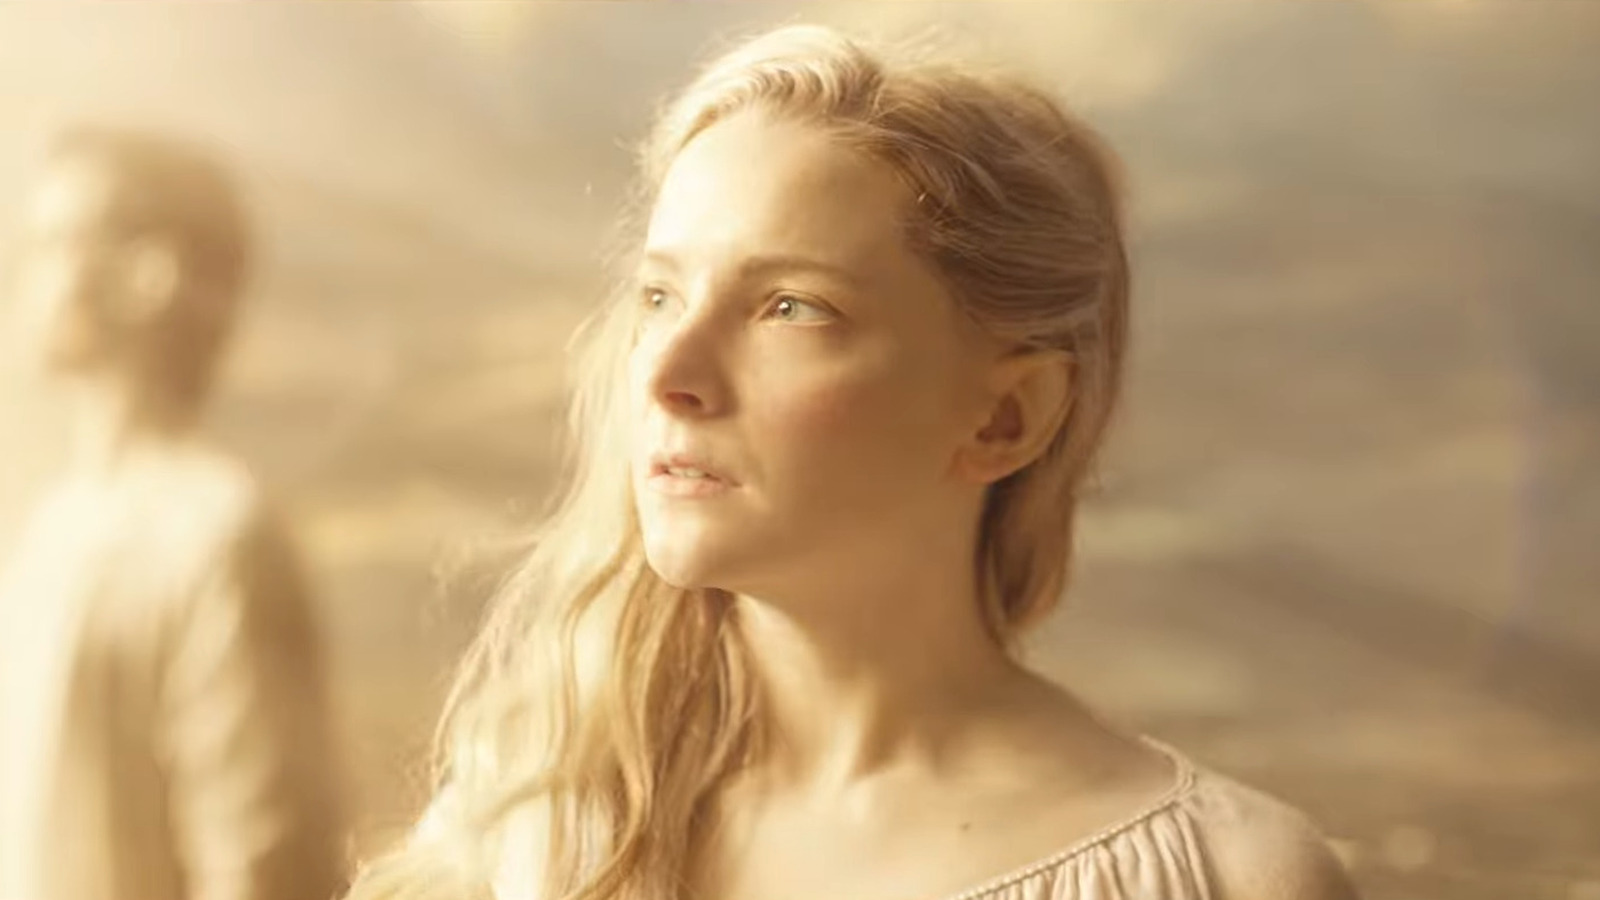 The Lord Of The Rings: The Rings Of Power' Rumor Claims Galadriel's Husband  Celeborn To Appear In Season 2 - Bounding Into Comics